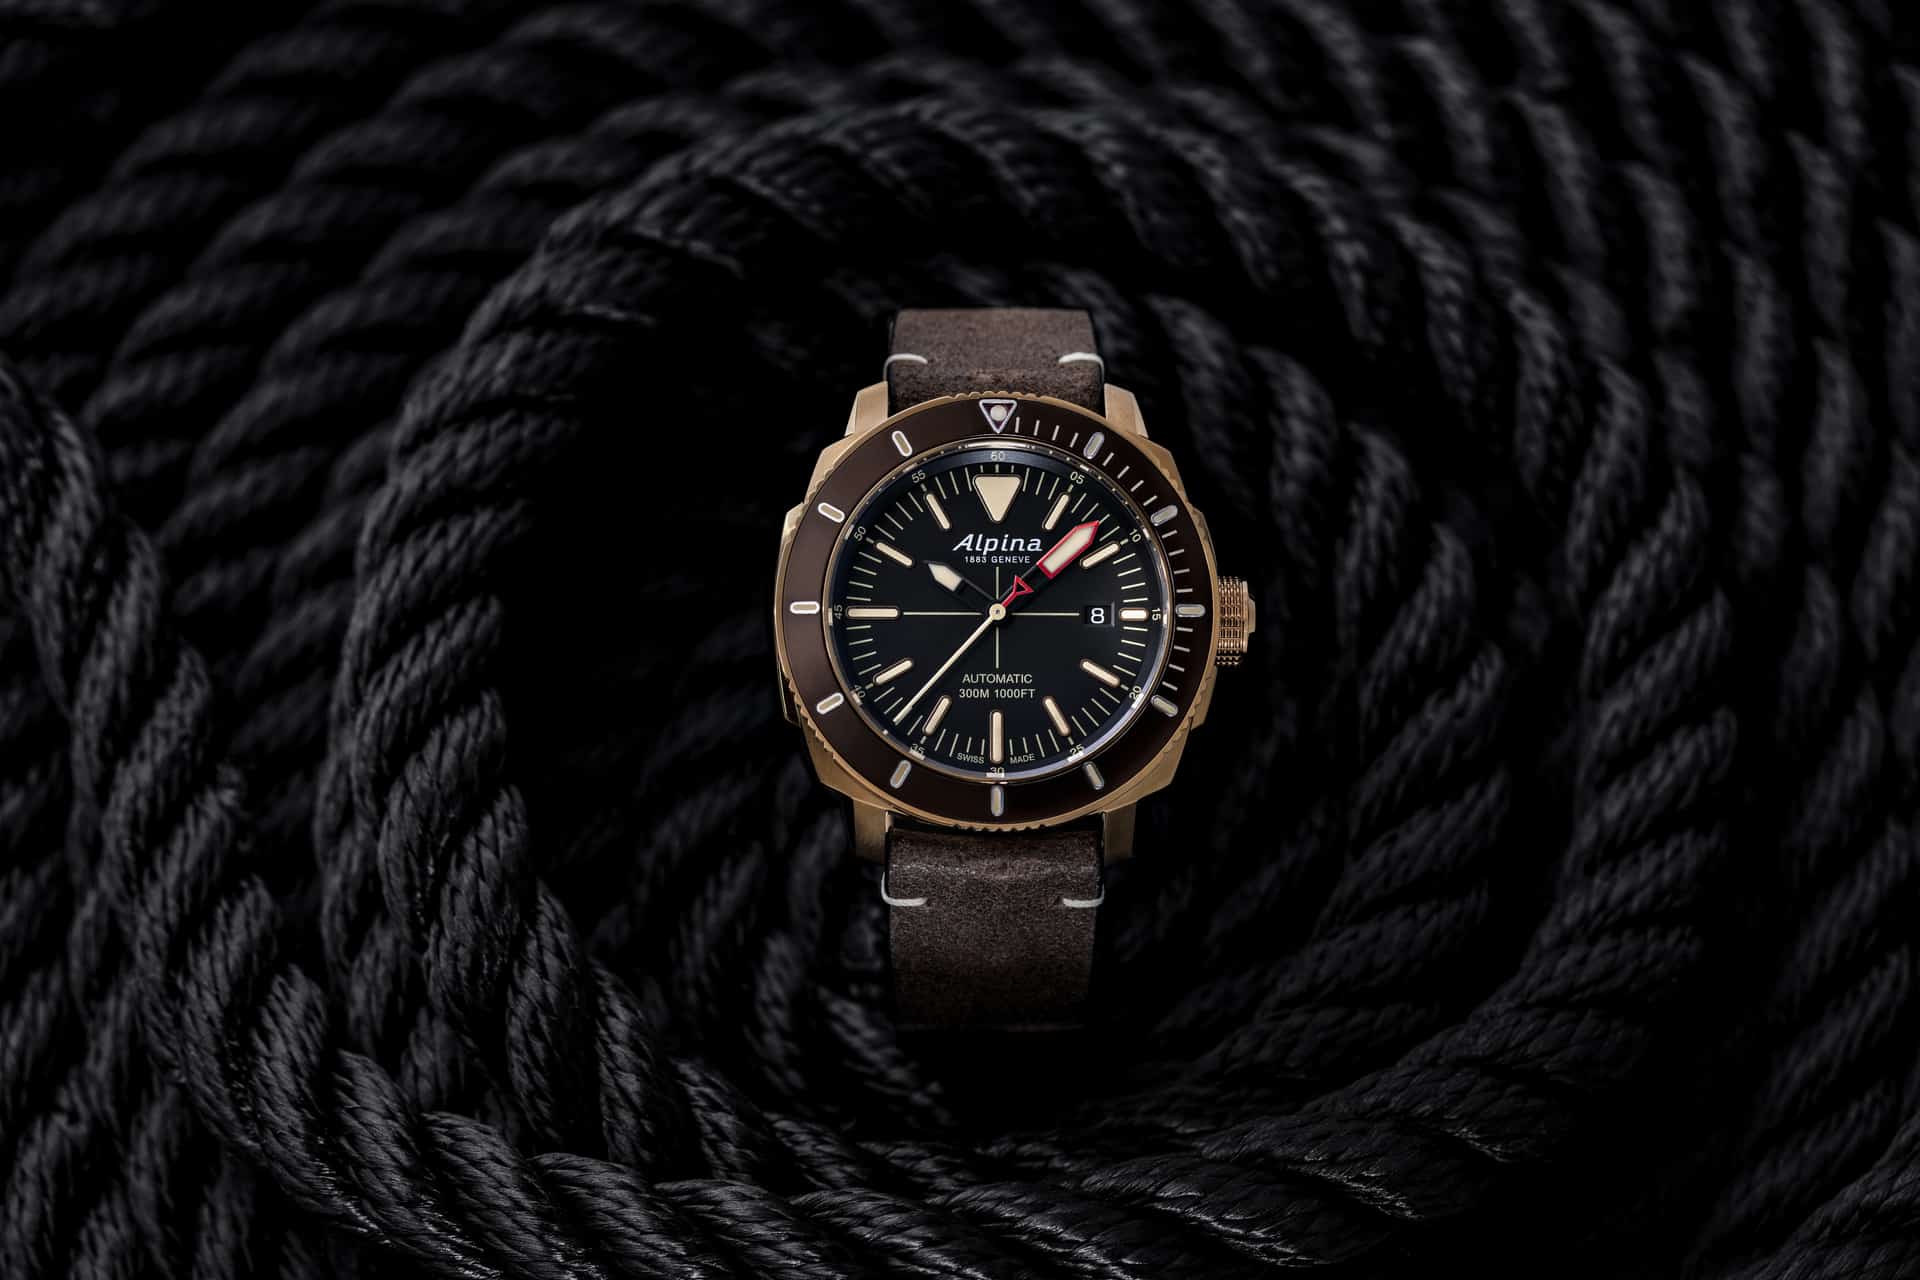 Alpina’s diving history goes on with the new Seastrong Diver 300